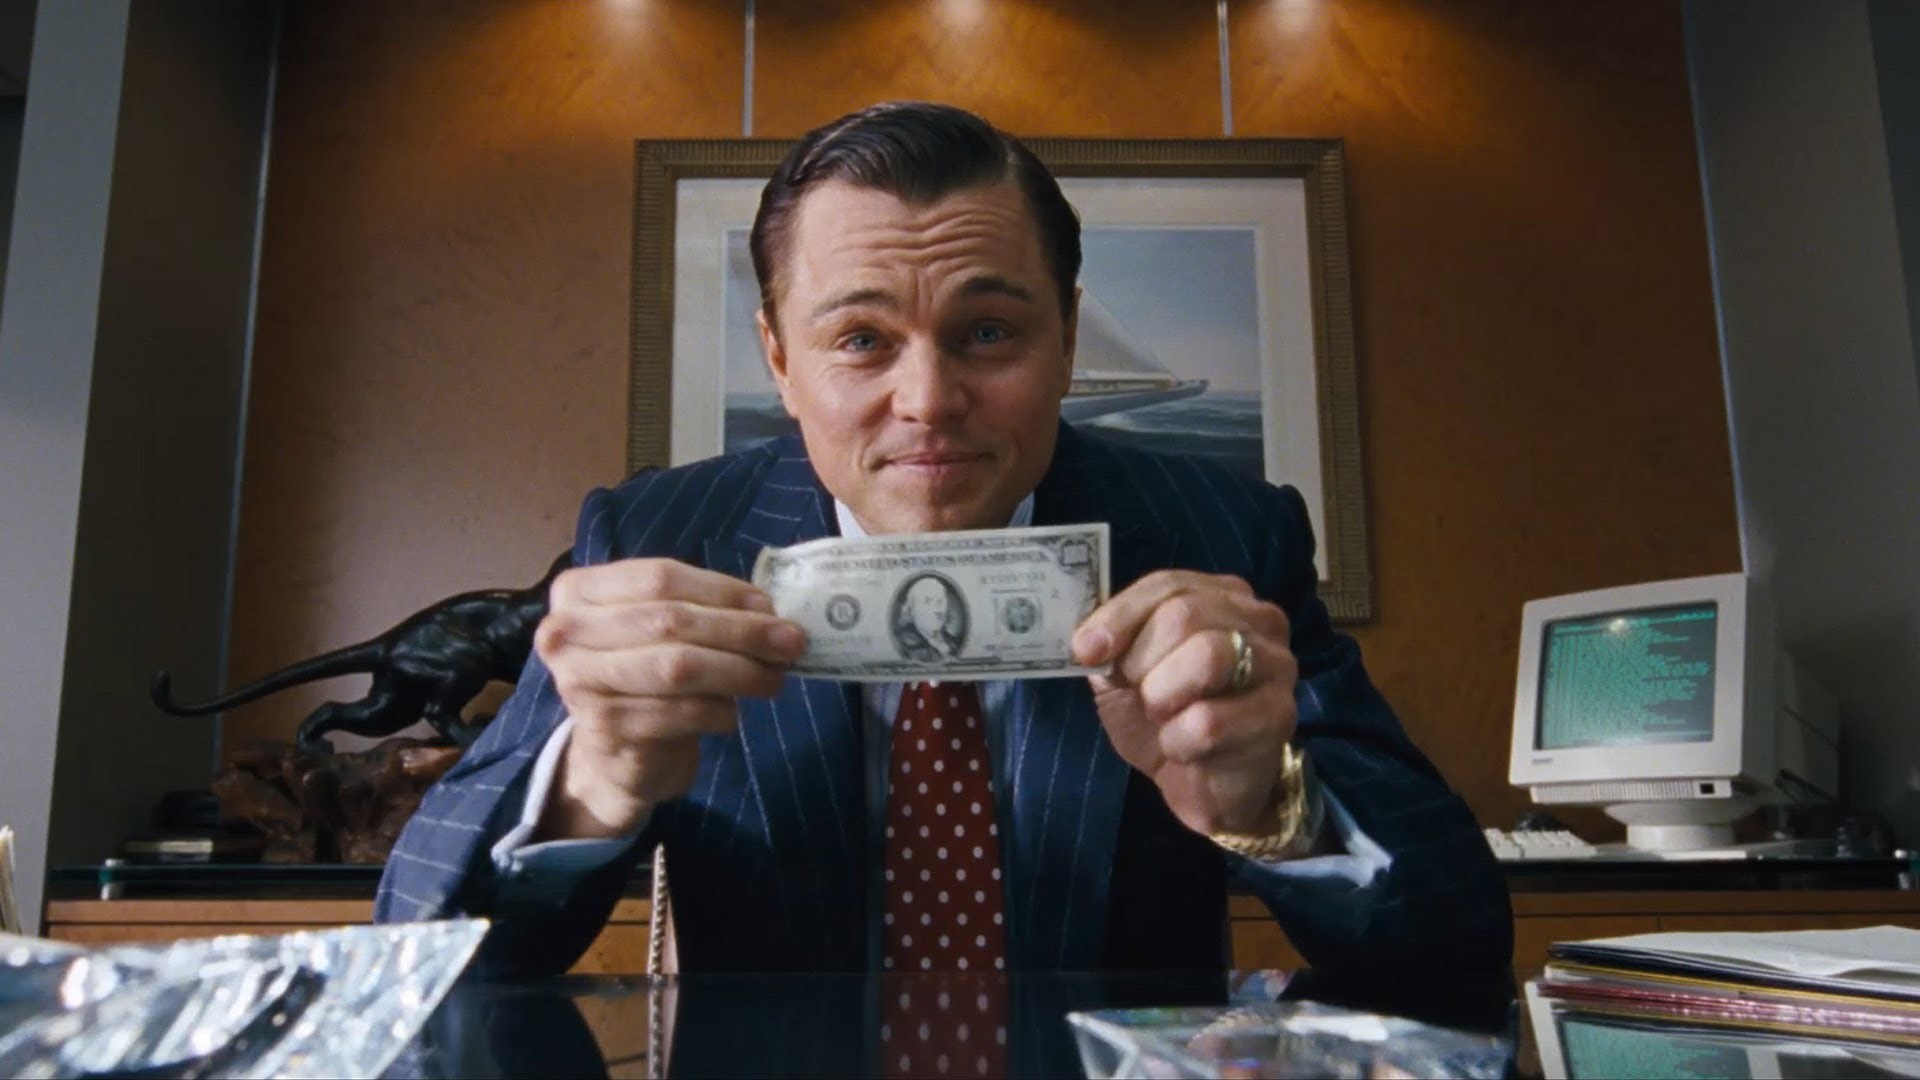 1920x1080 'The Wolf of Wall Street' Trailer 2 - YouTube